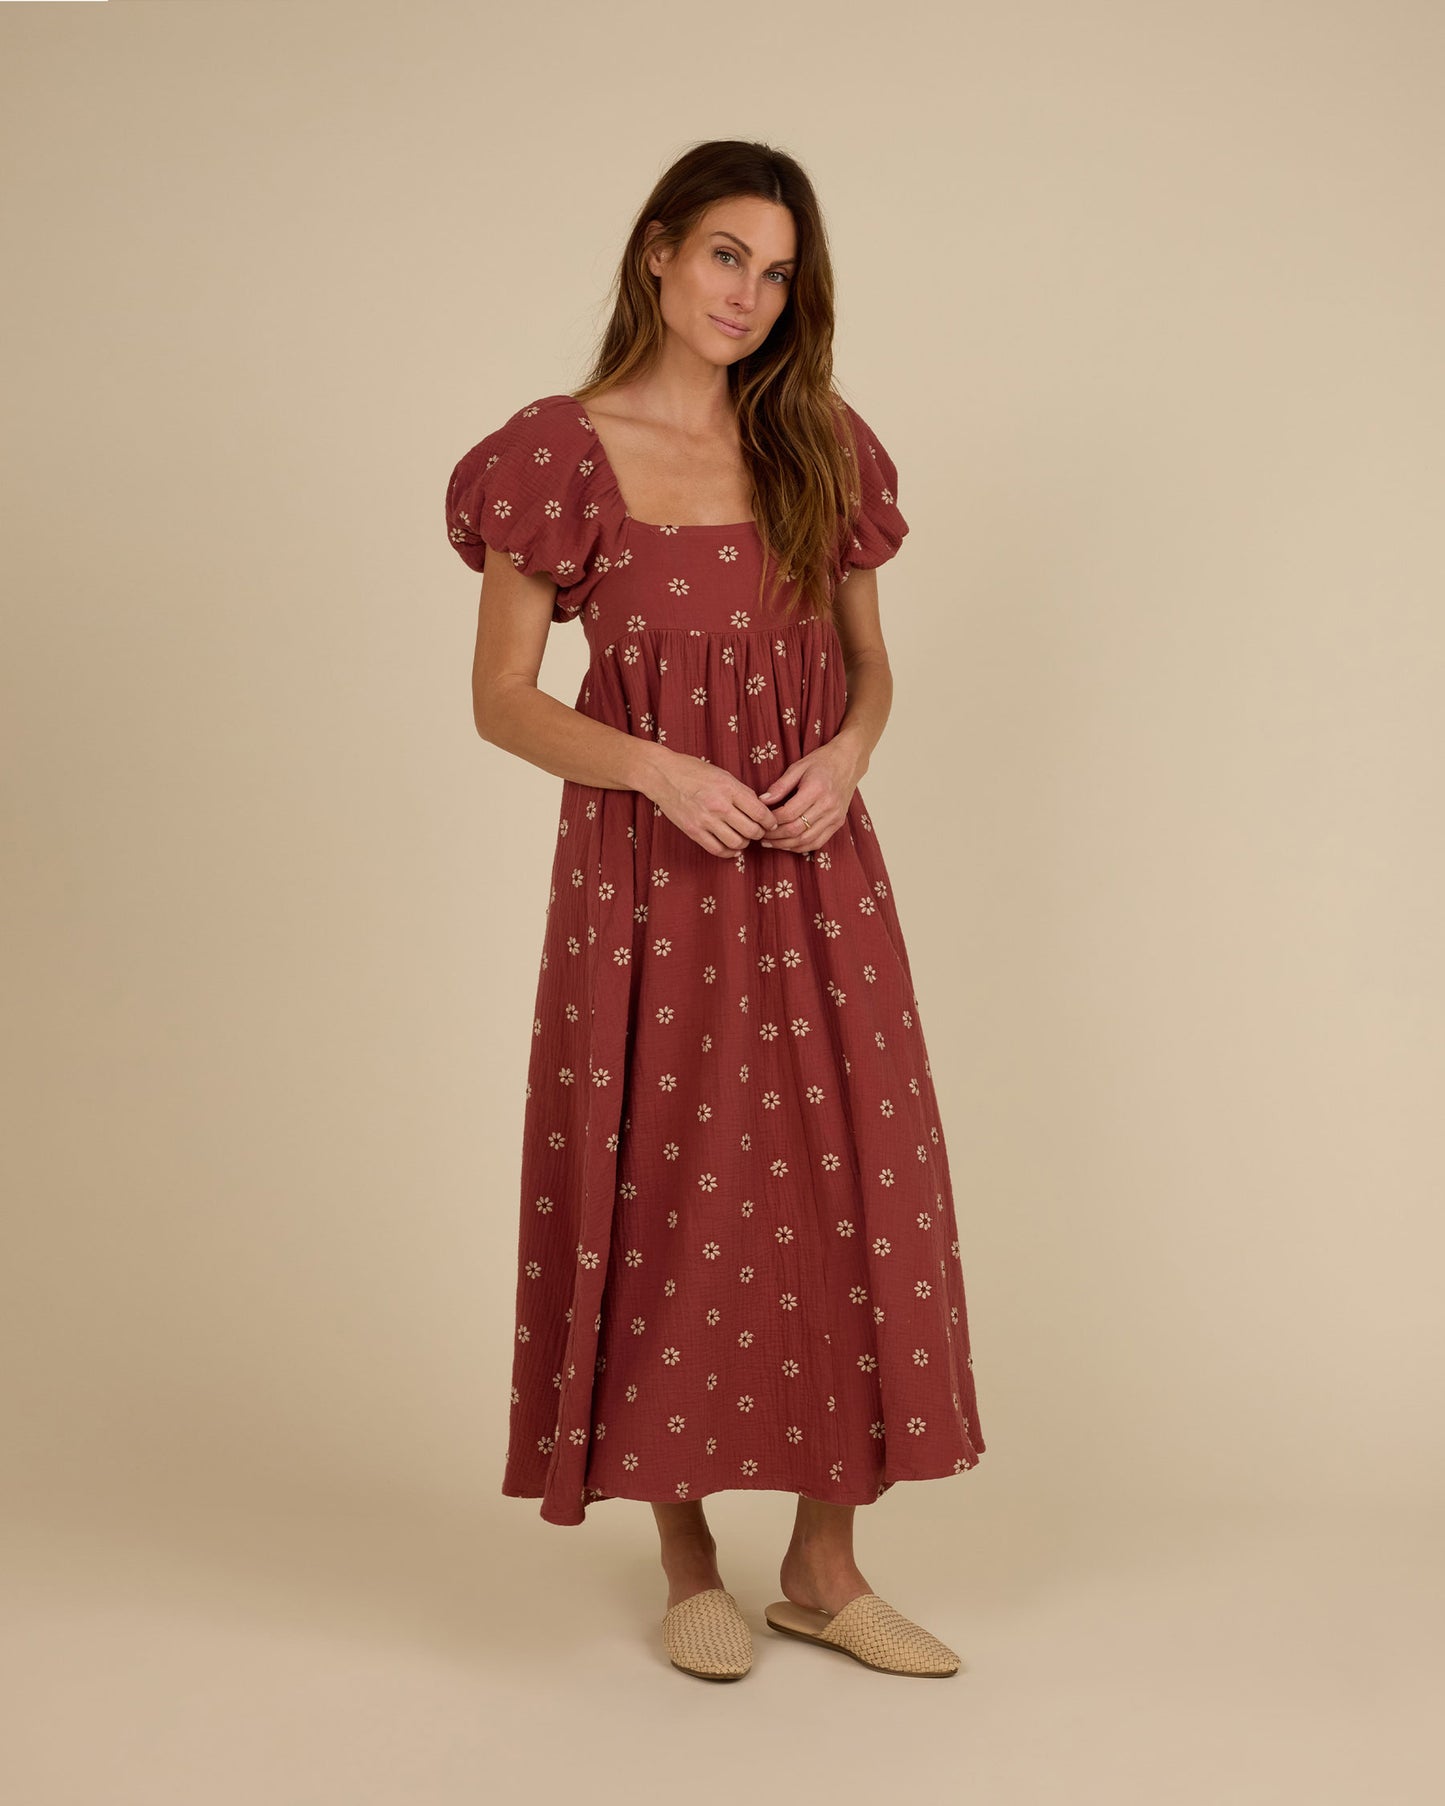 Rylee and Cru Women's Oceane Dress - Embroidered Daisy - Strawberry